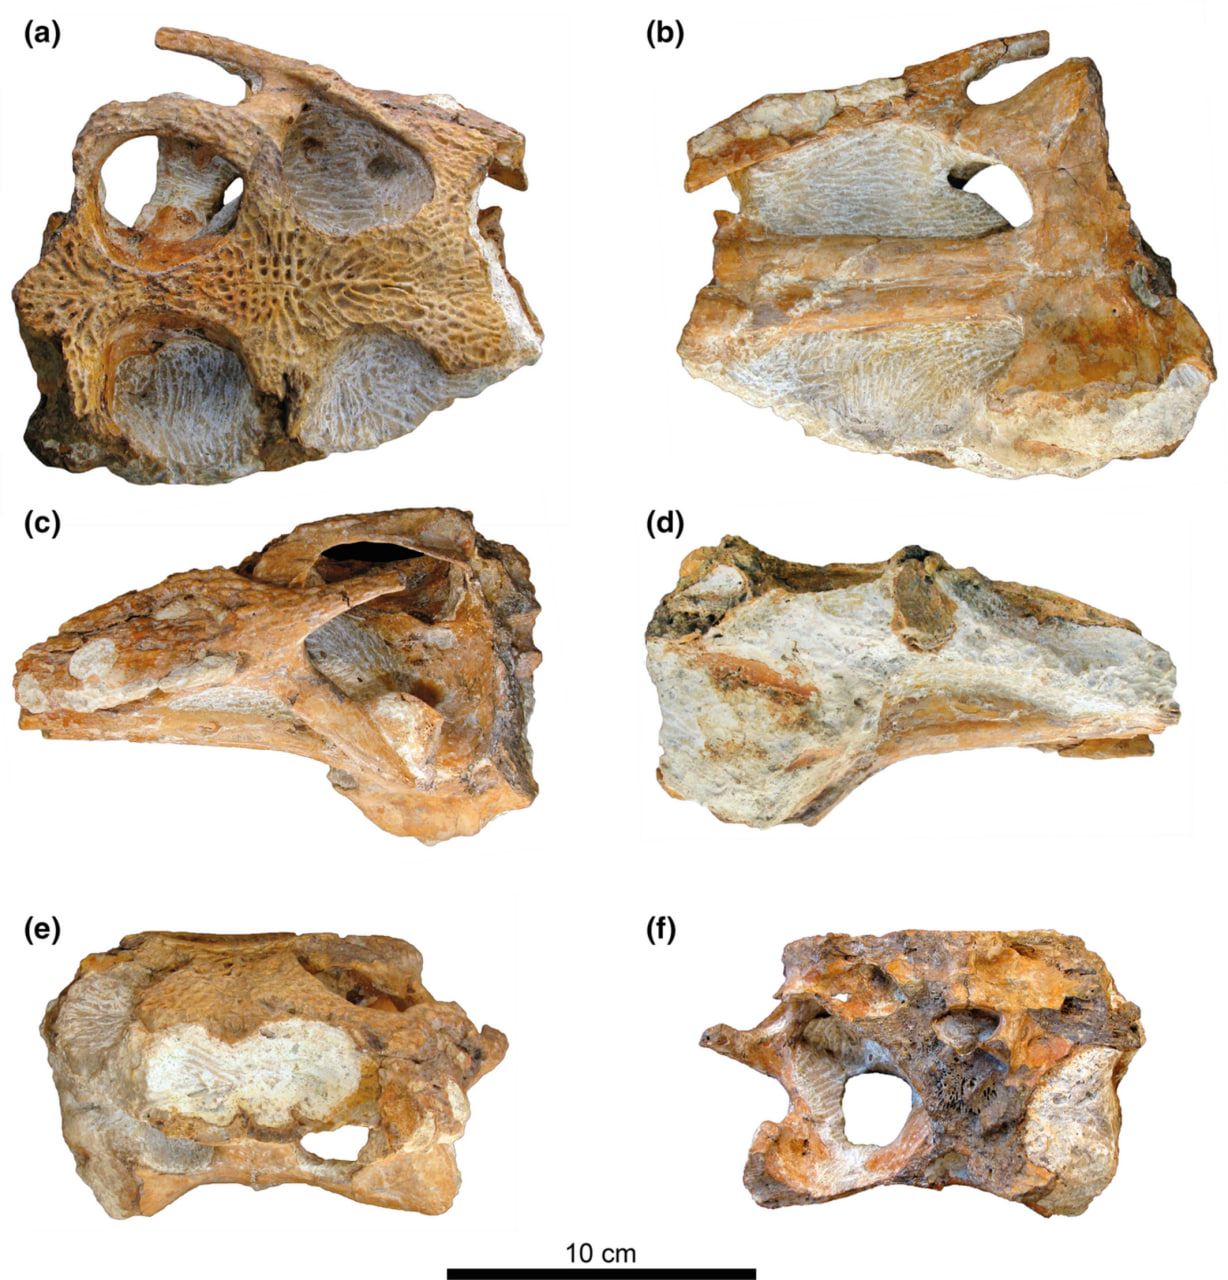 Photographs of the skull of Portugalosuchus: dorsal view (a); ventral view (b); left view (c); right view (d); front view (e); and back view (f) © Journal of Anatomy